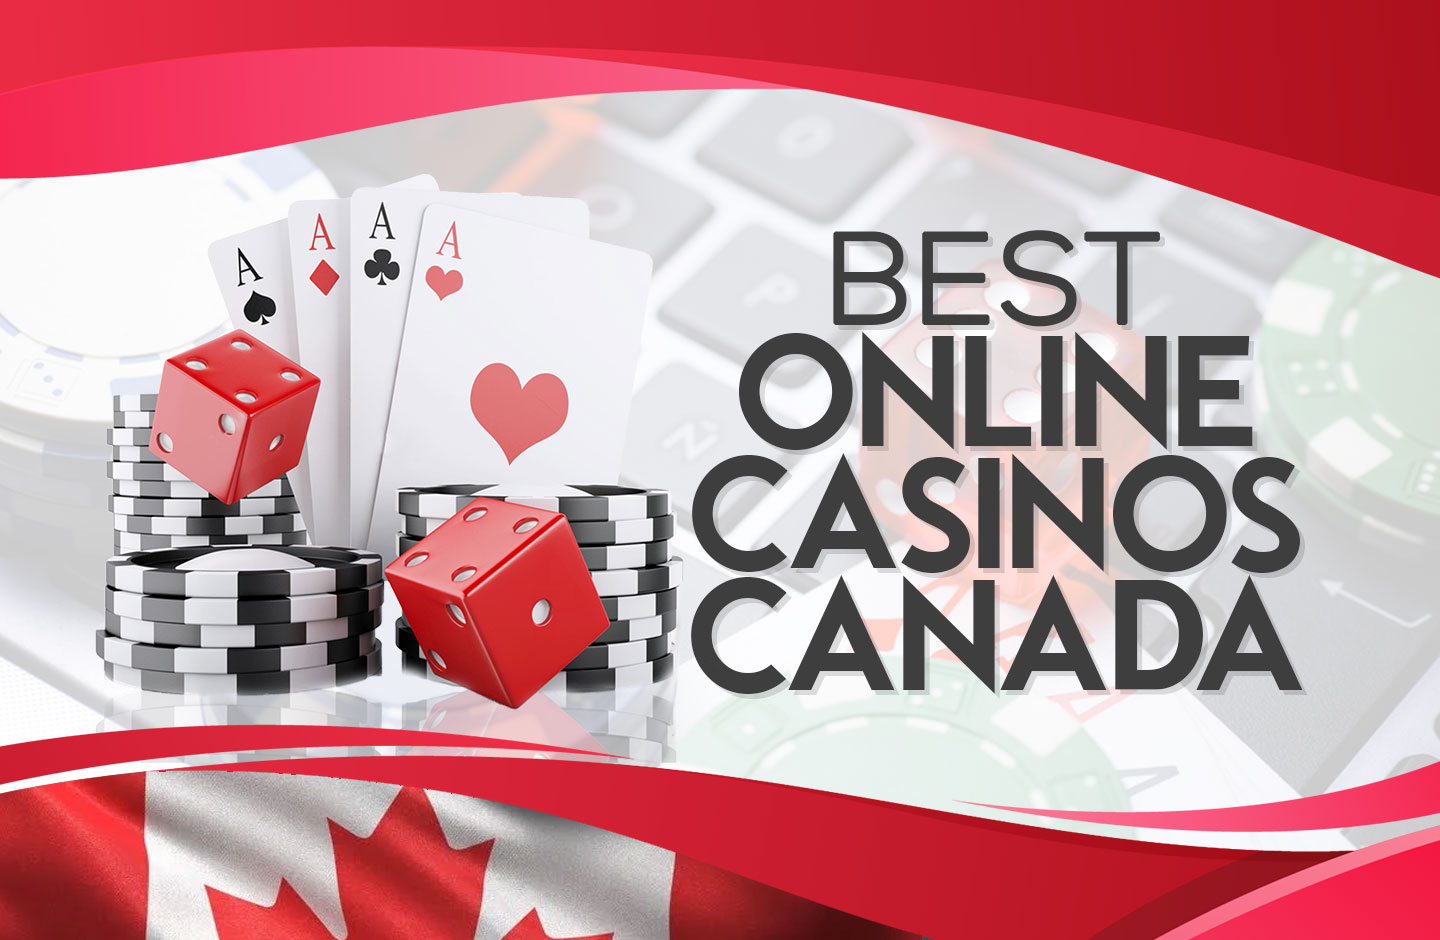 7 Facebook Pages To Follow About top online casinos